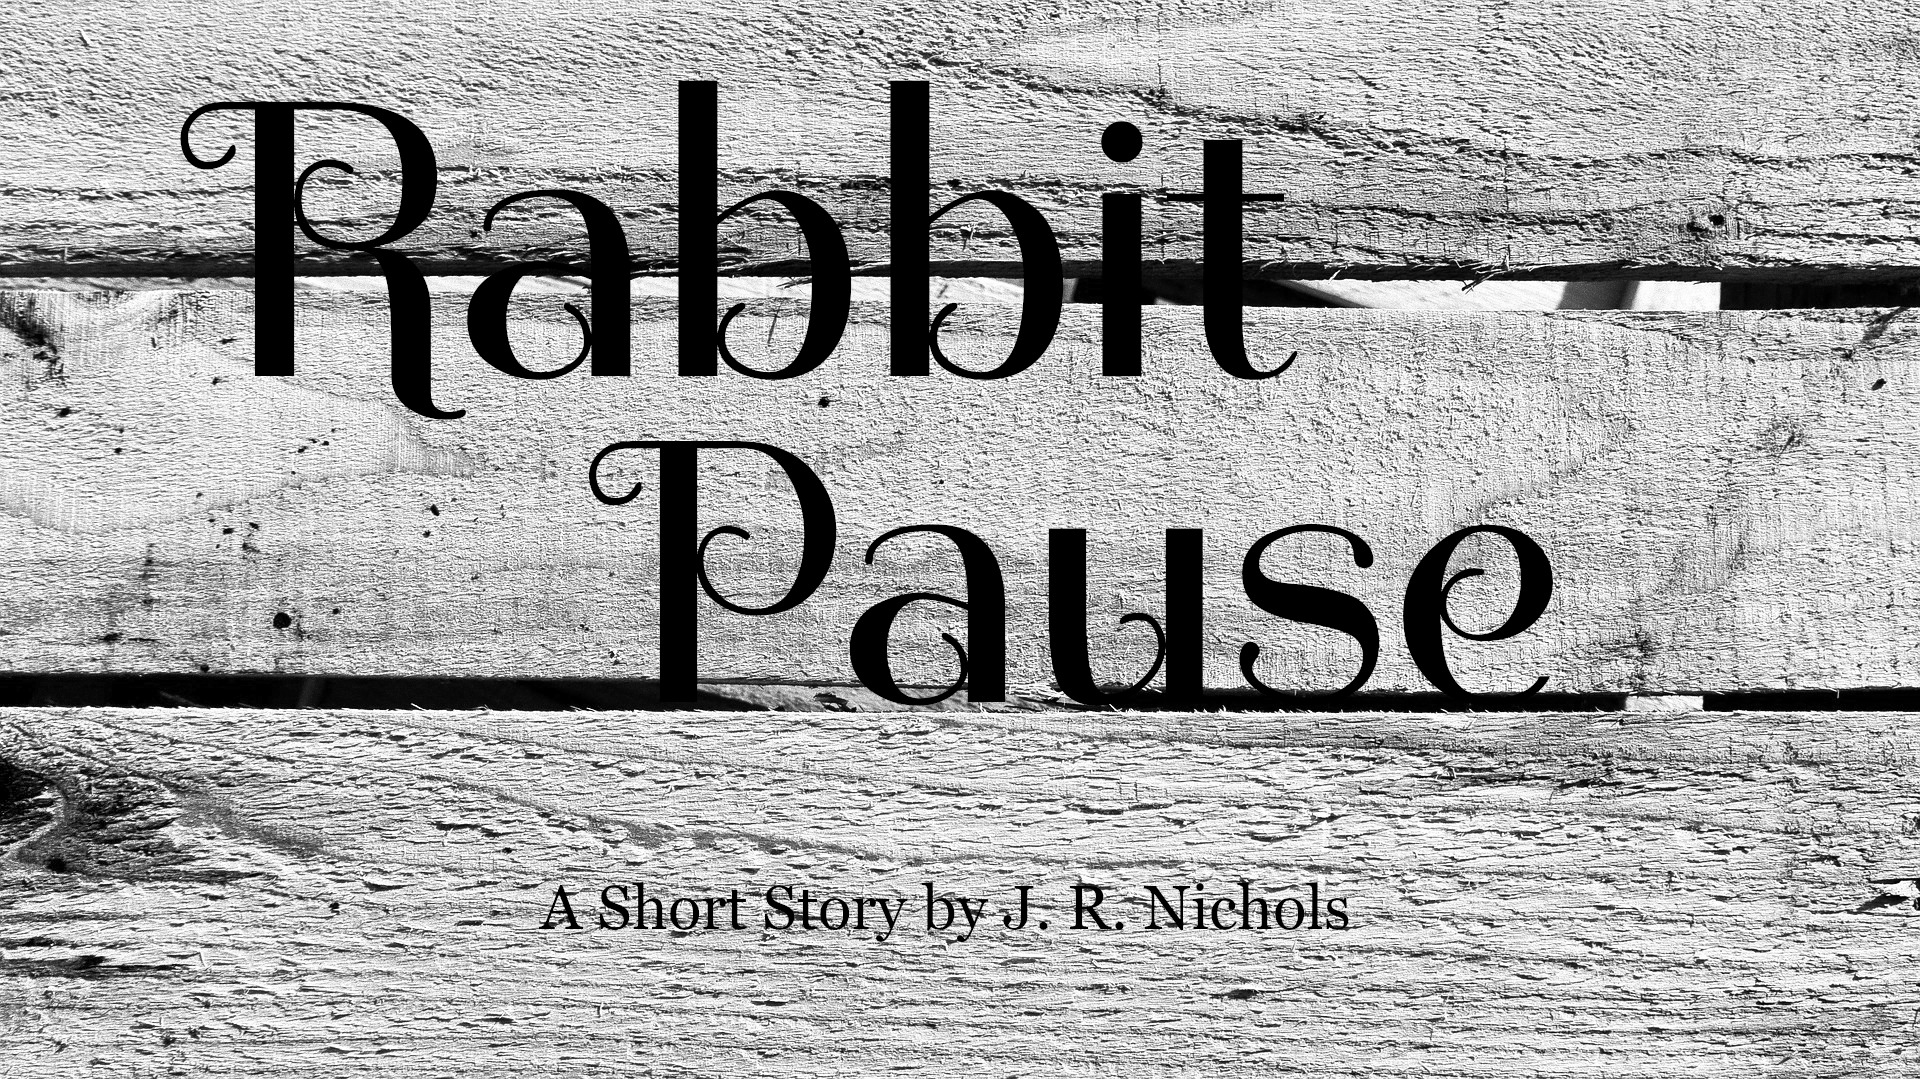 Rabbit Pause is a short story by J. R. Nichols